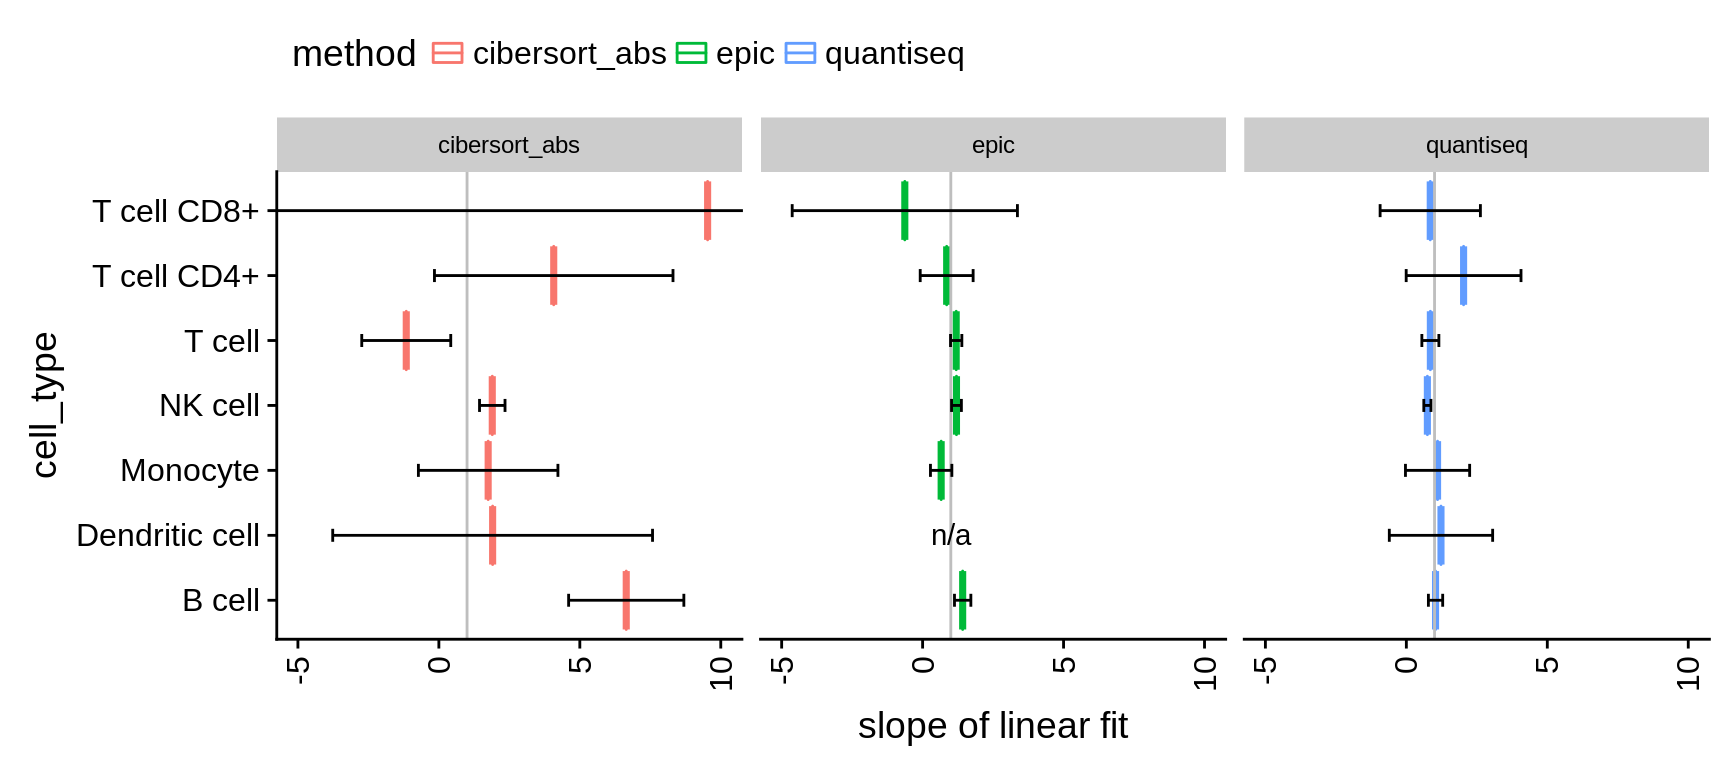 Comparison of absolute methods. Values indicate the slope of a linear model fitted to predictions vs. true fractions. Values < 1 indicate an under-prediction of the cell type, values > 1 an over-prediction respectively. The error bars have been computed using `confint` on the result of `lm`. 